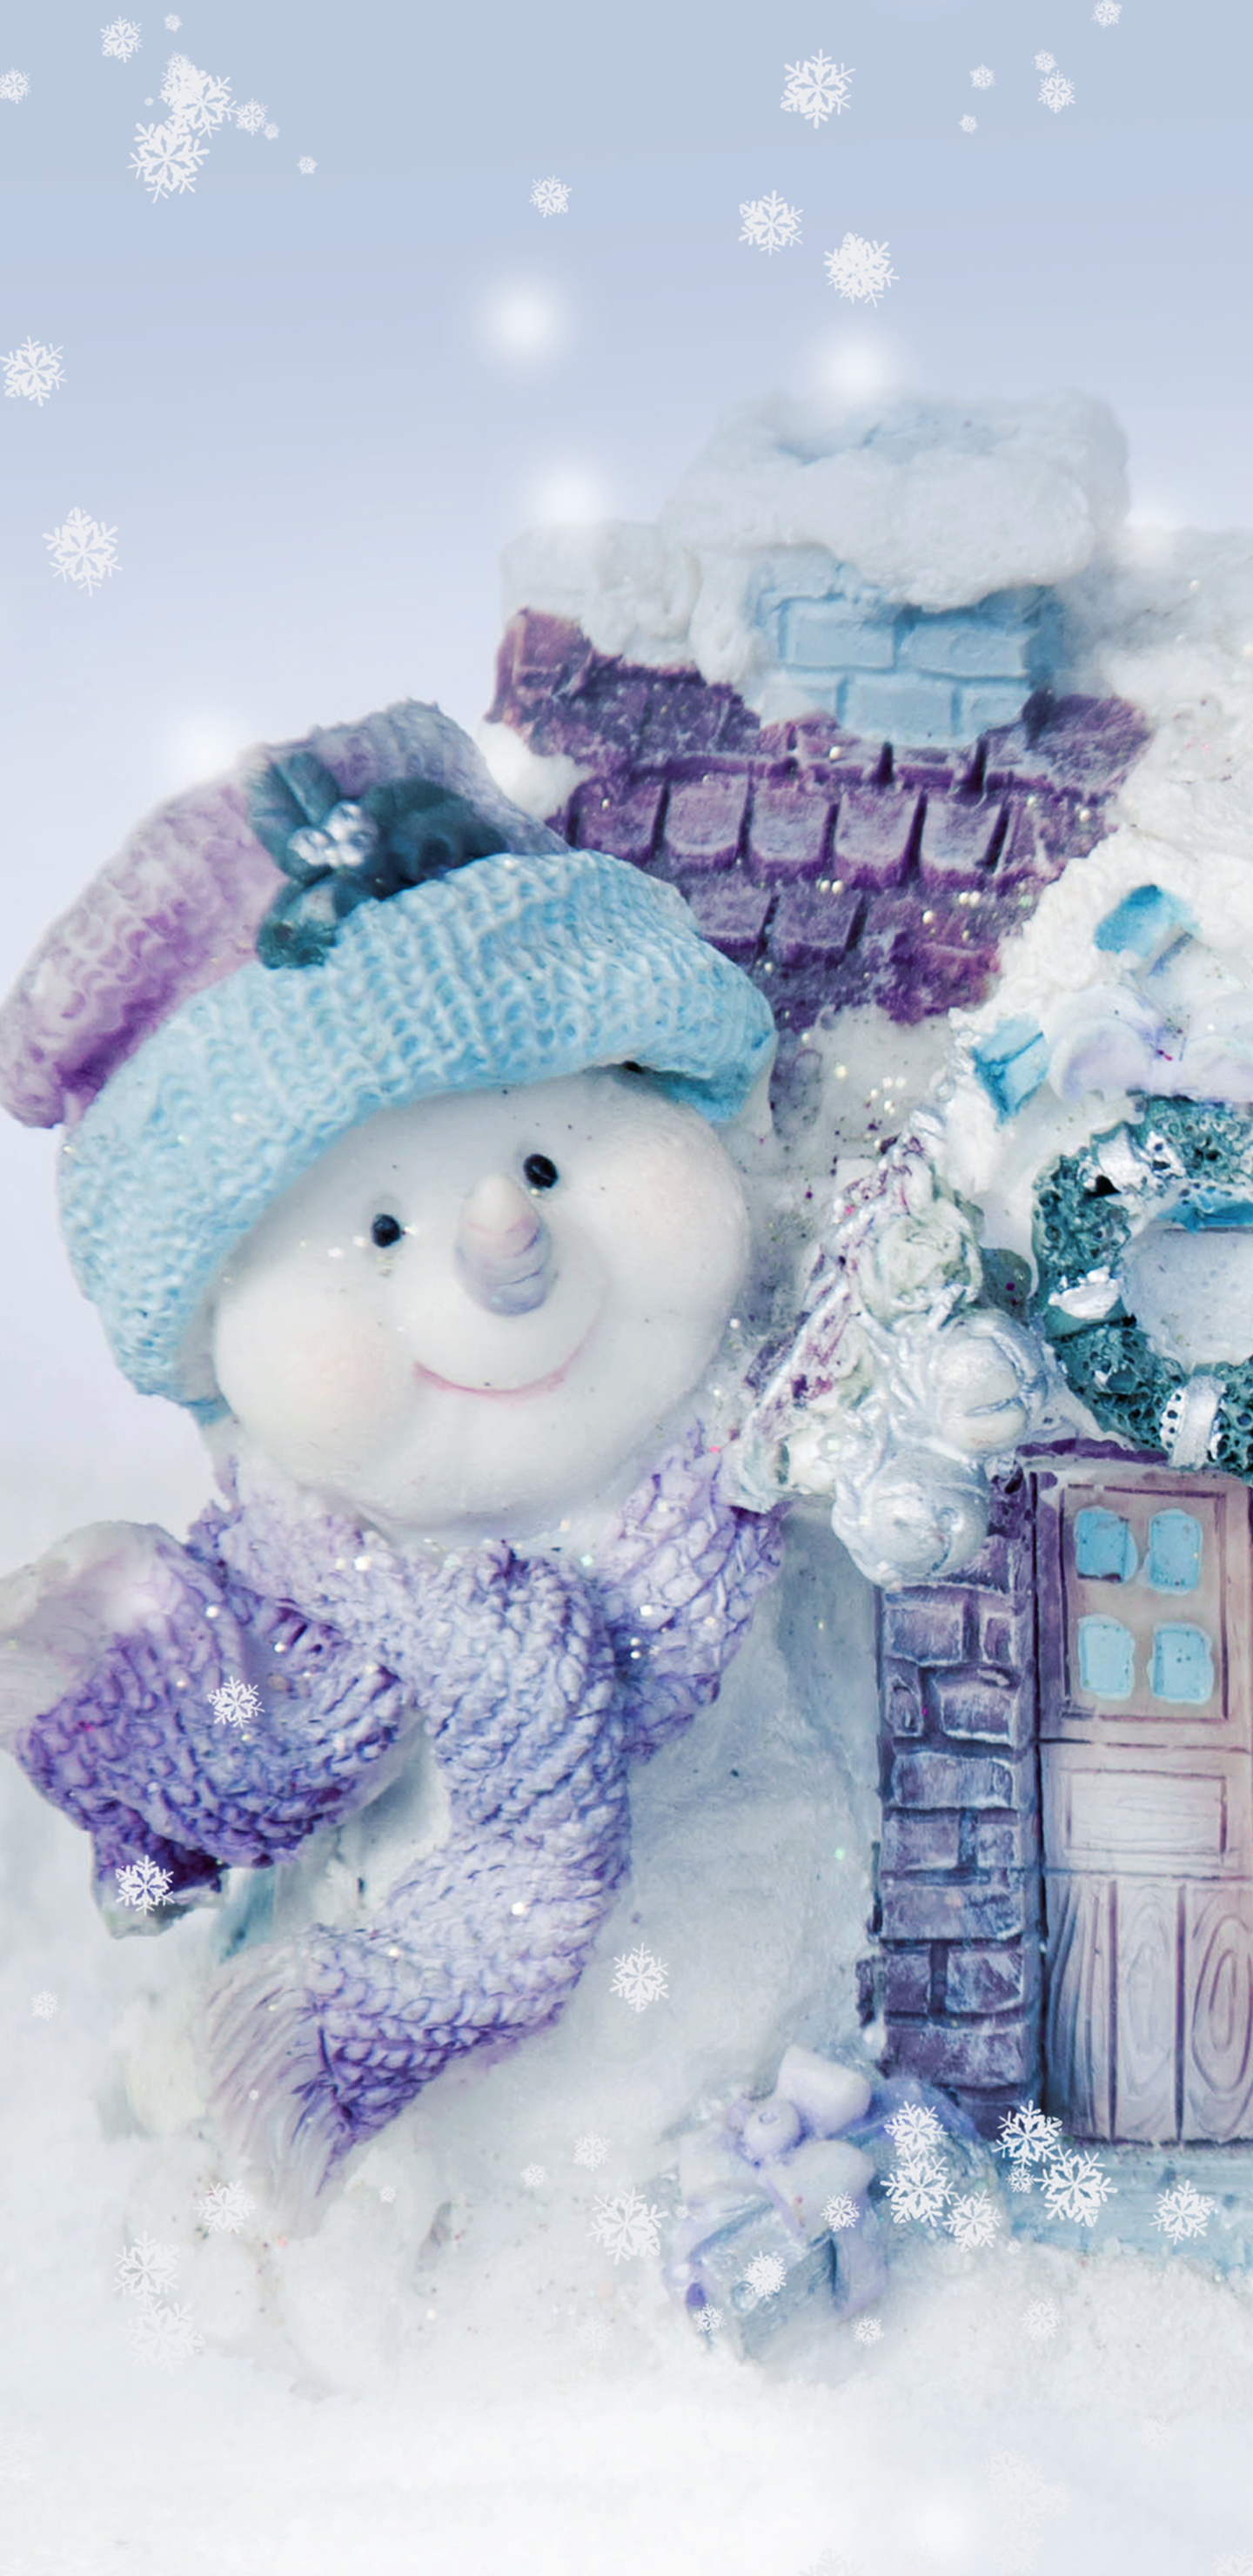 holiday, christmas, cold, snow, snowman, decoration, winter, snowflake